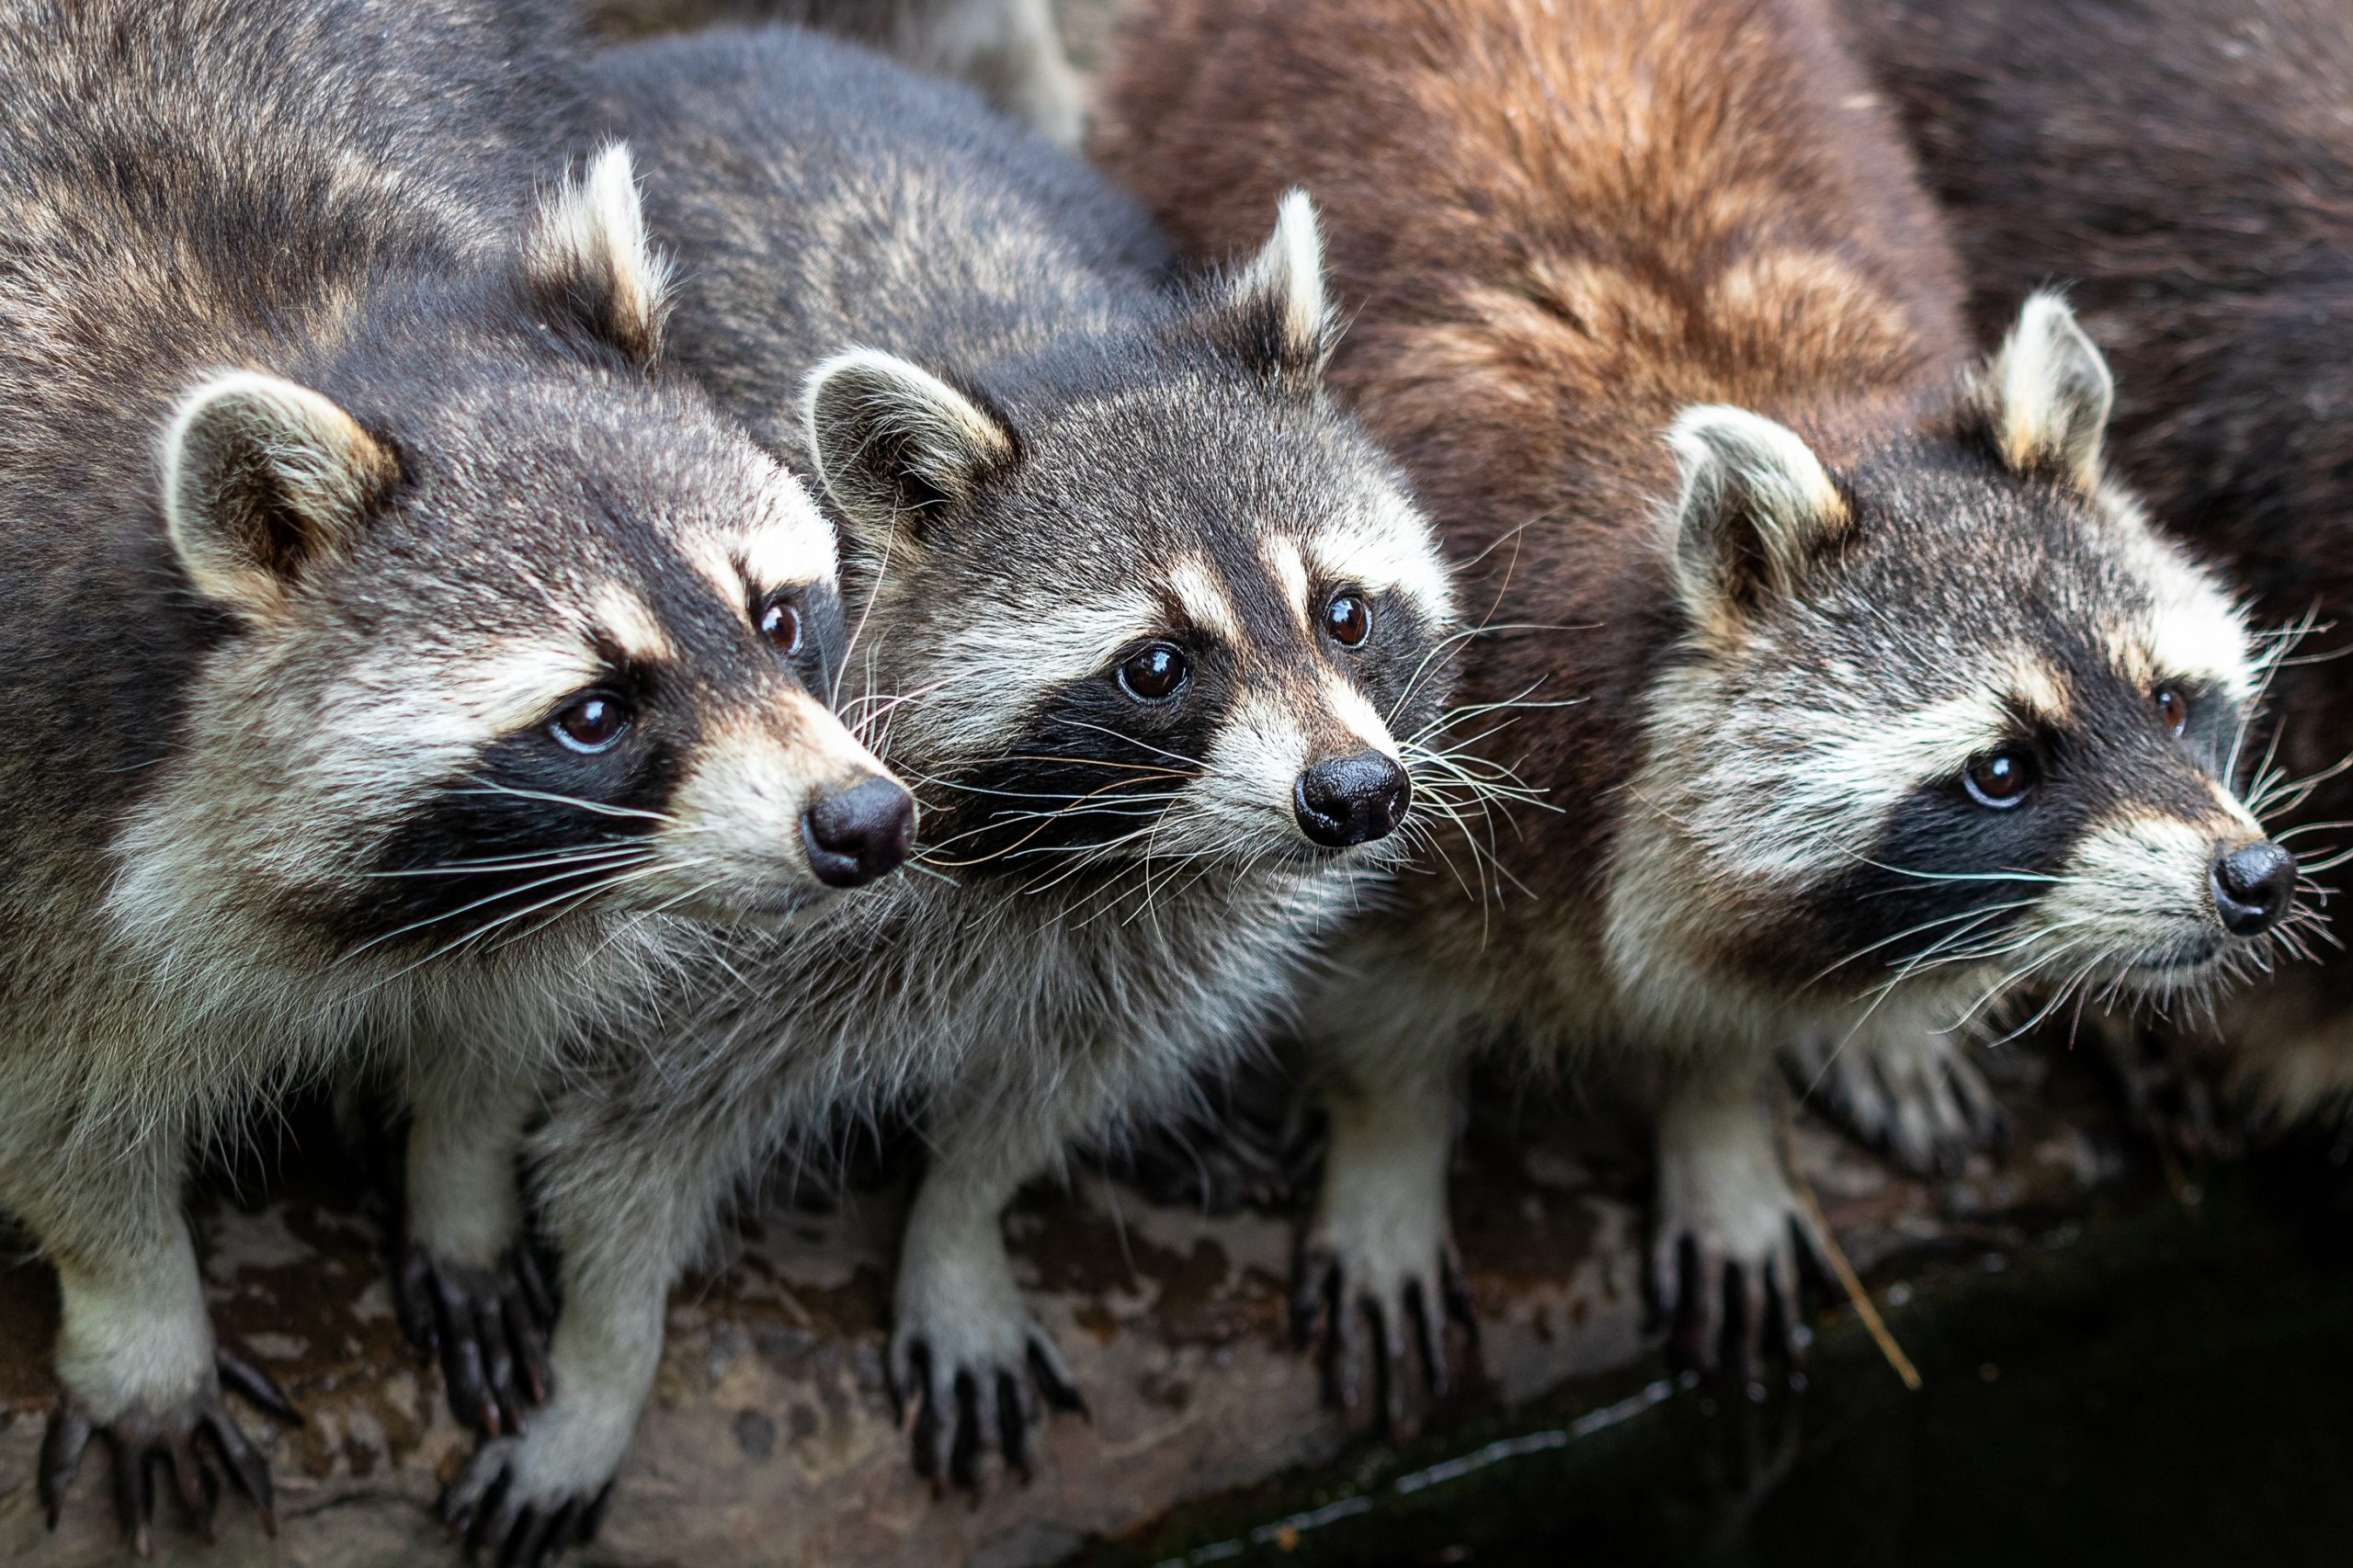 How to get rid of raccoons from your house in Canada